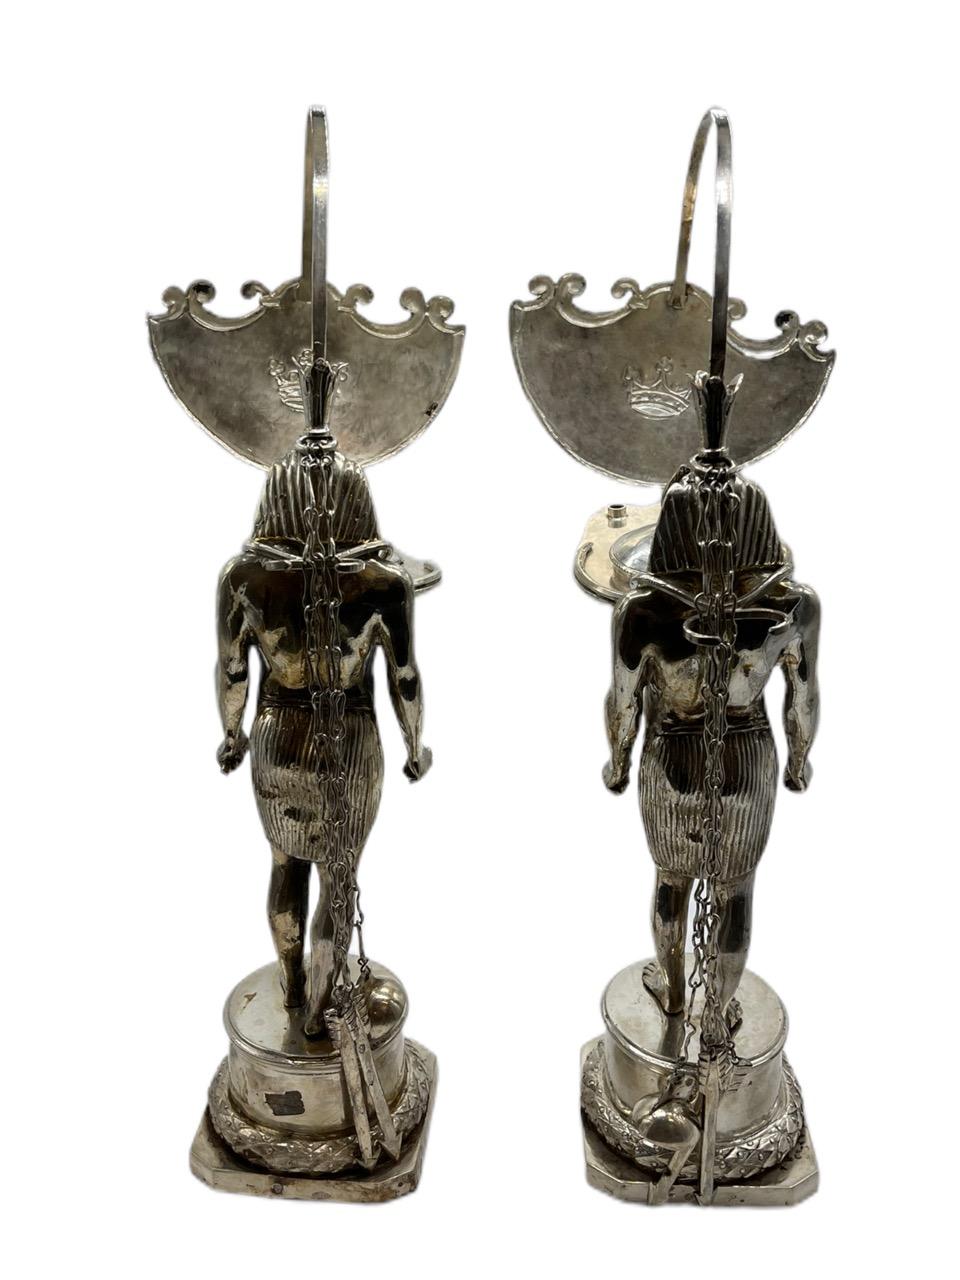 Pair of Early 19th Century Italian Antique Silver Oil Lamps by Vincenzo Belli II For Sale 3